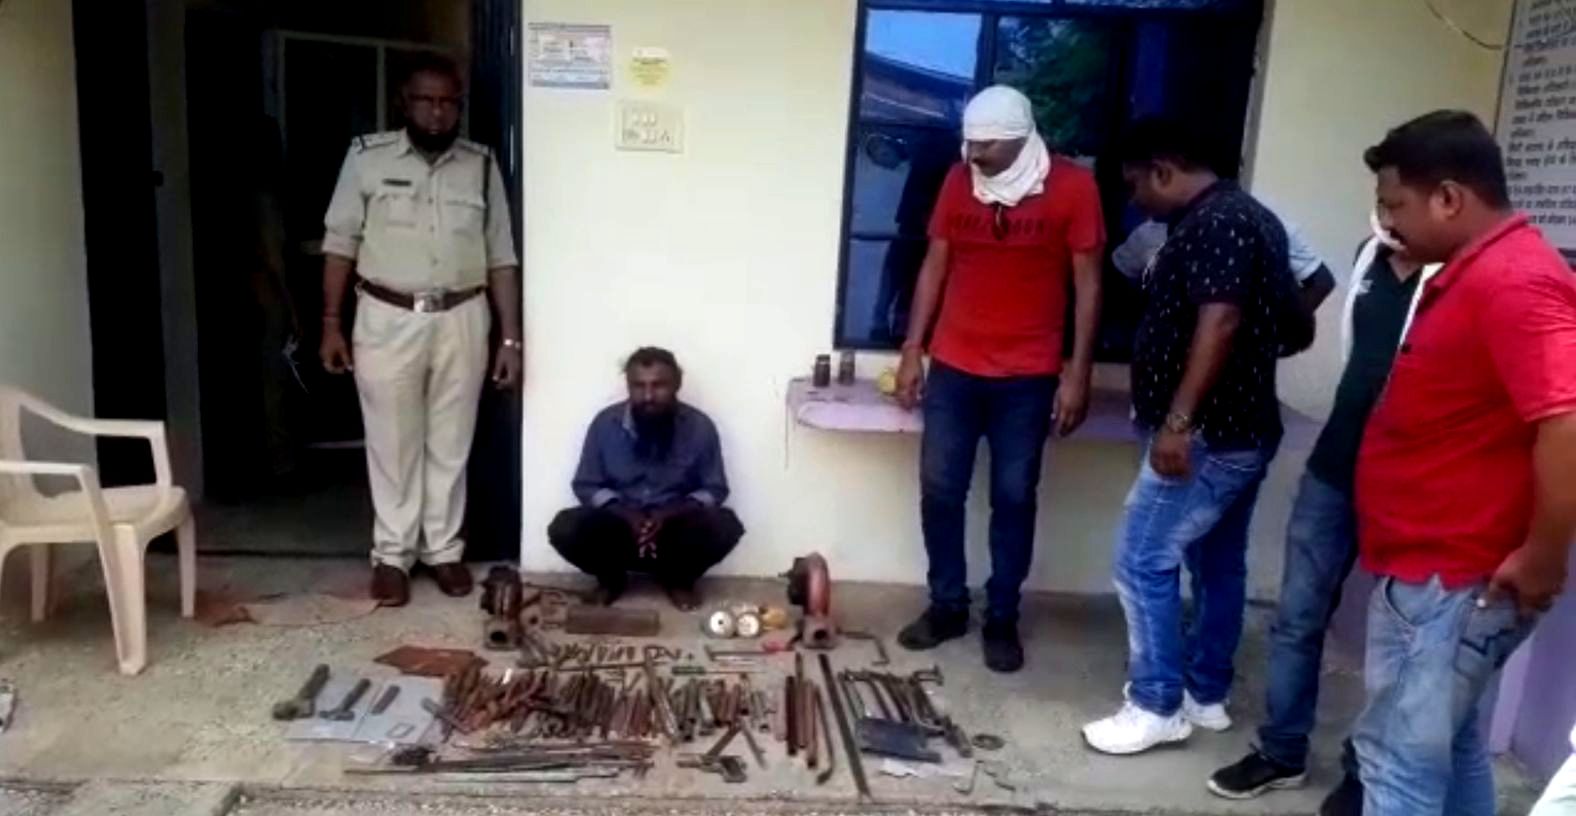 Police caught a cache of weapons